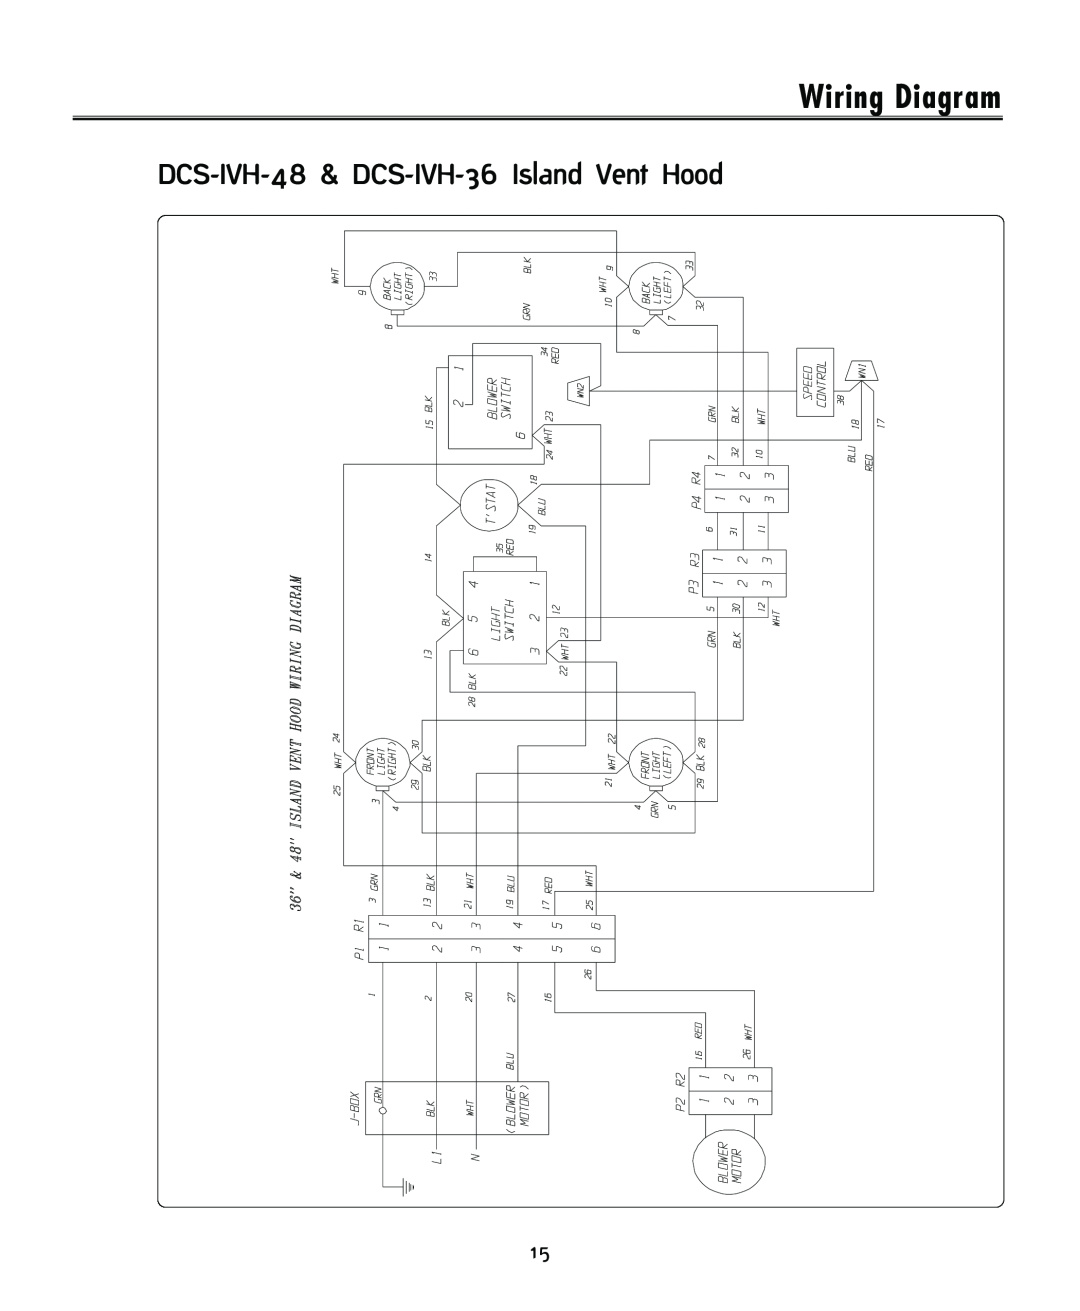 DCS installation instructions Wiring Diagram, DCS-IVH-48 & DCS-IVH-36 Island Vent Hood 